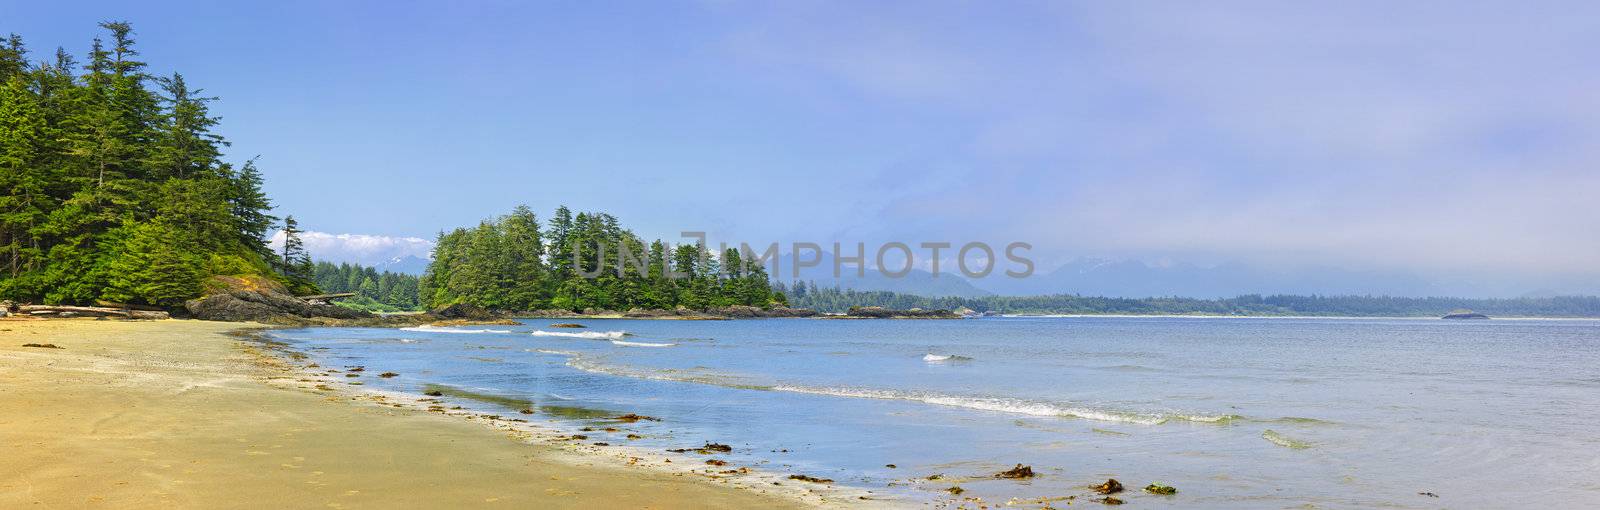 Panoramic view of Long Beach shore in Pacific Rim National park, Canada